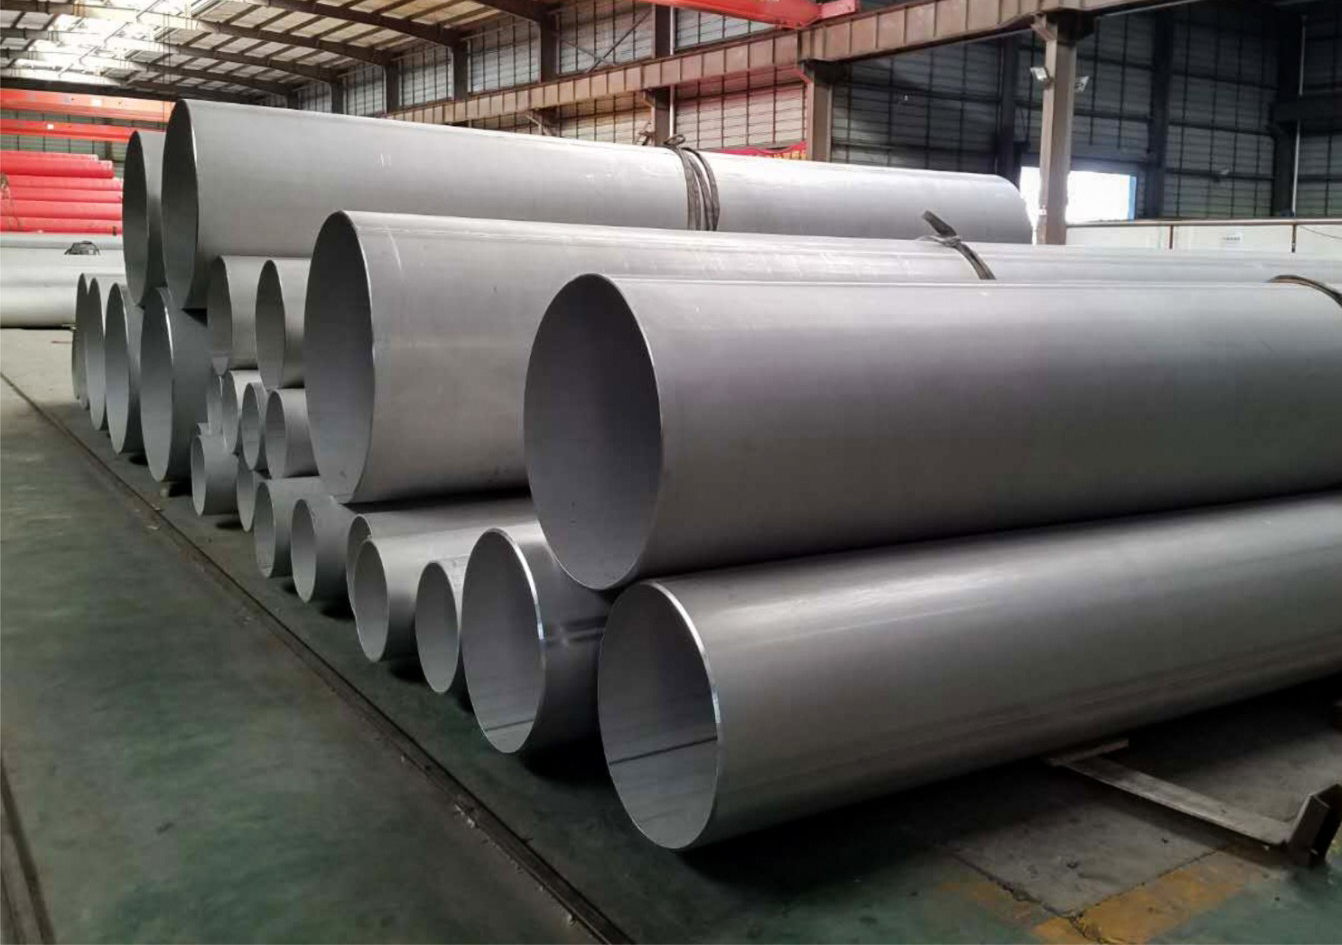 Stainless steel welded tube three welding process introduction